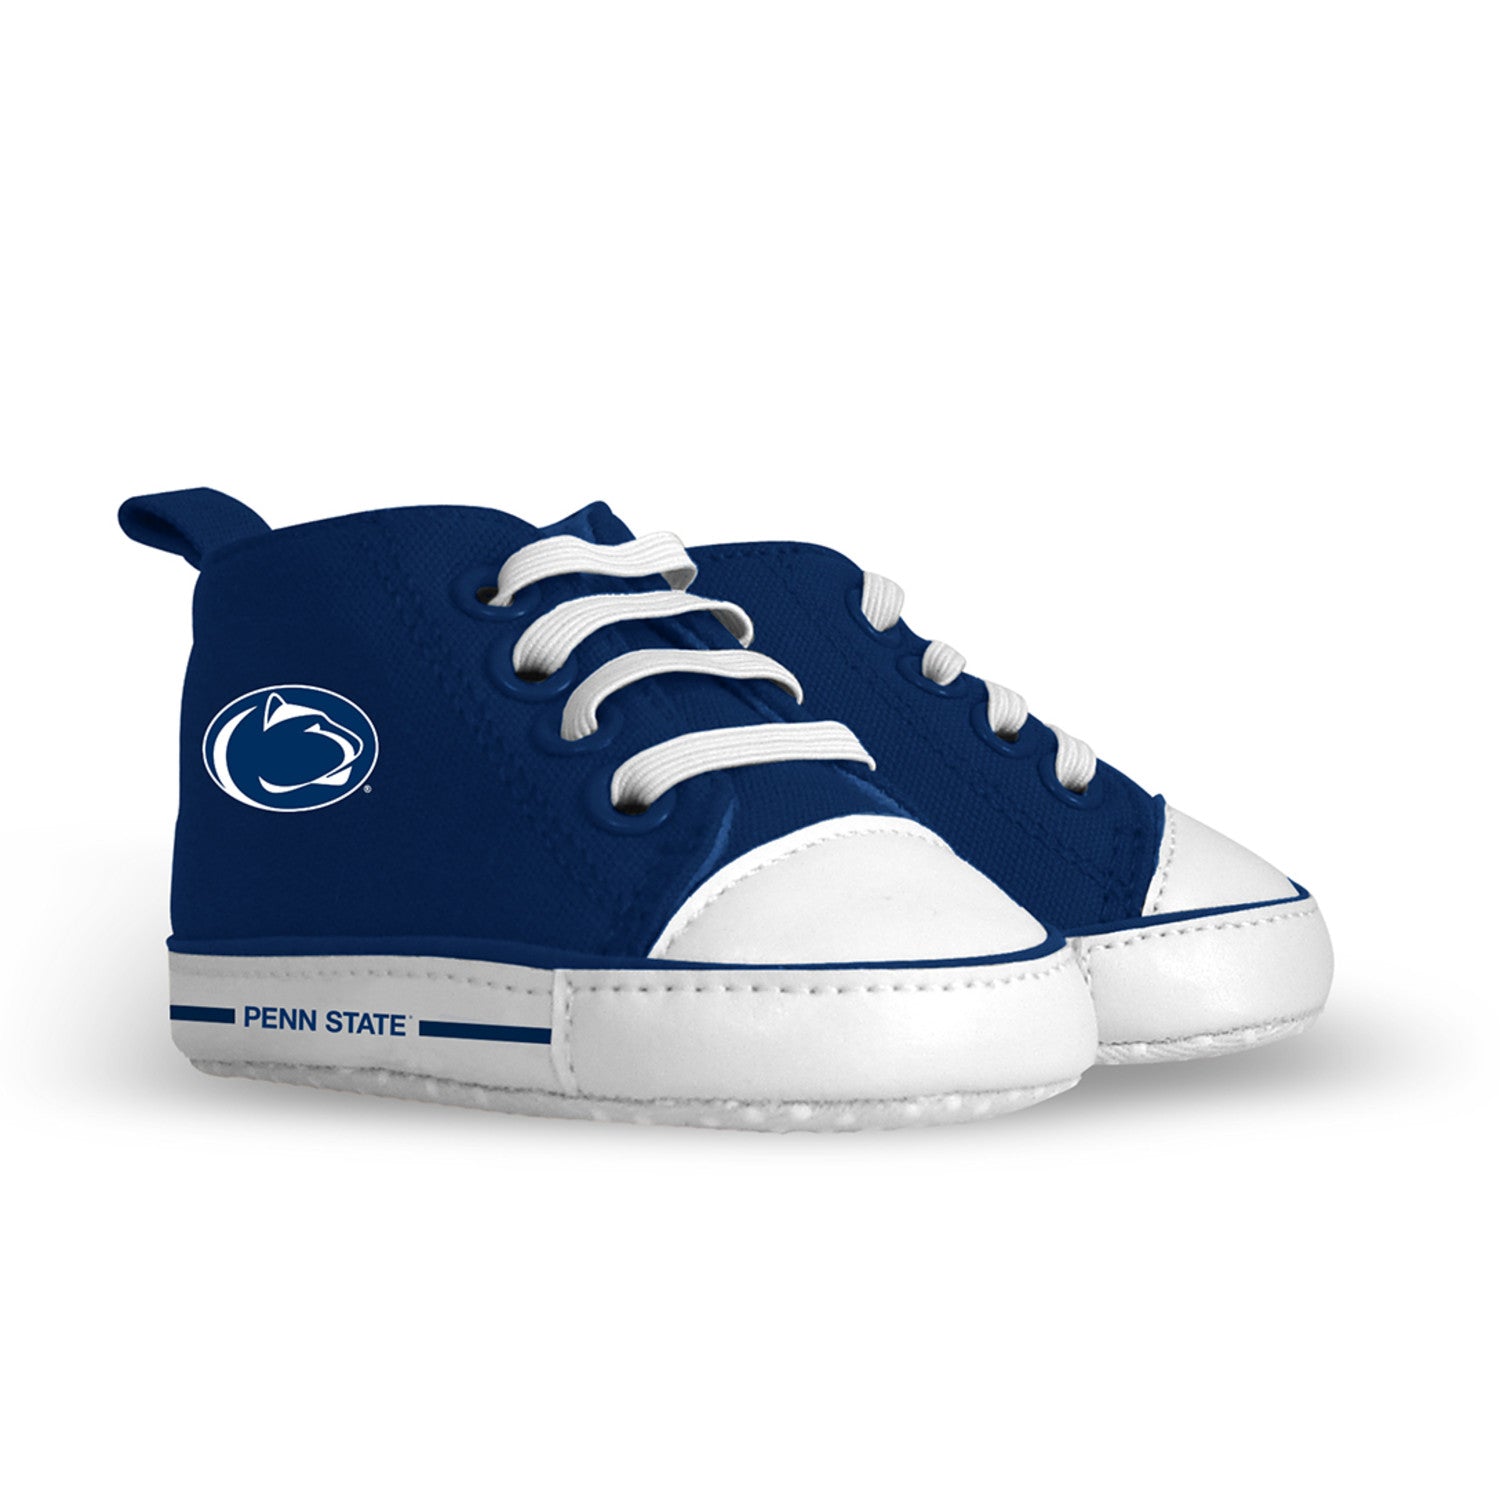 Penn State Nittany Lions Baby Shoes